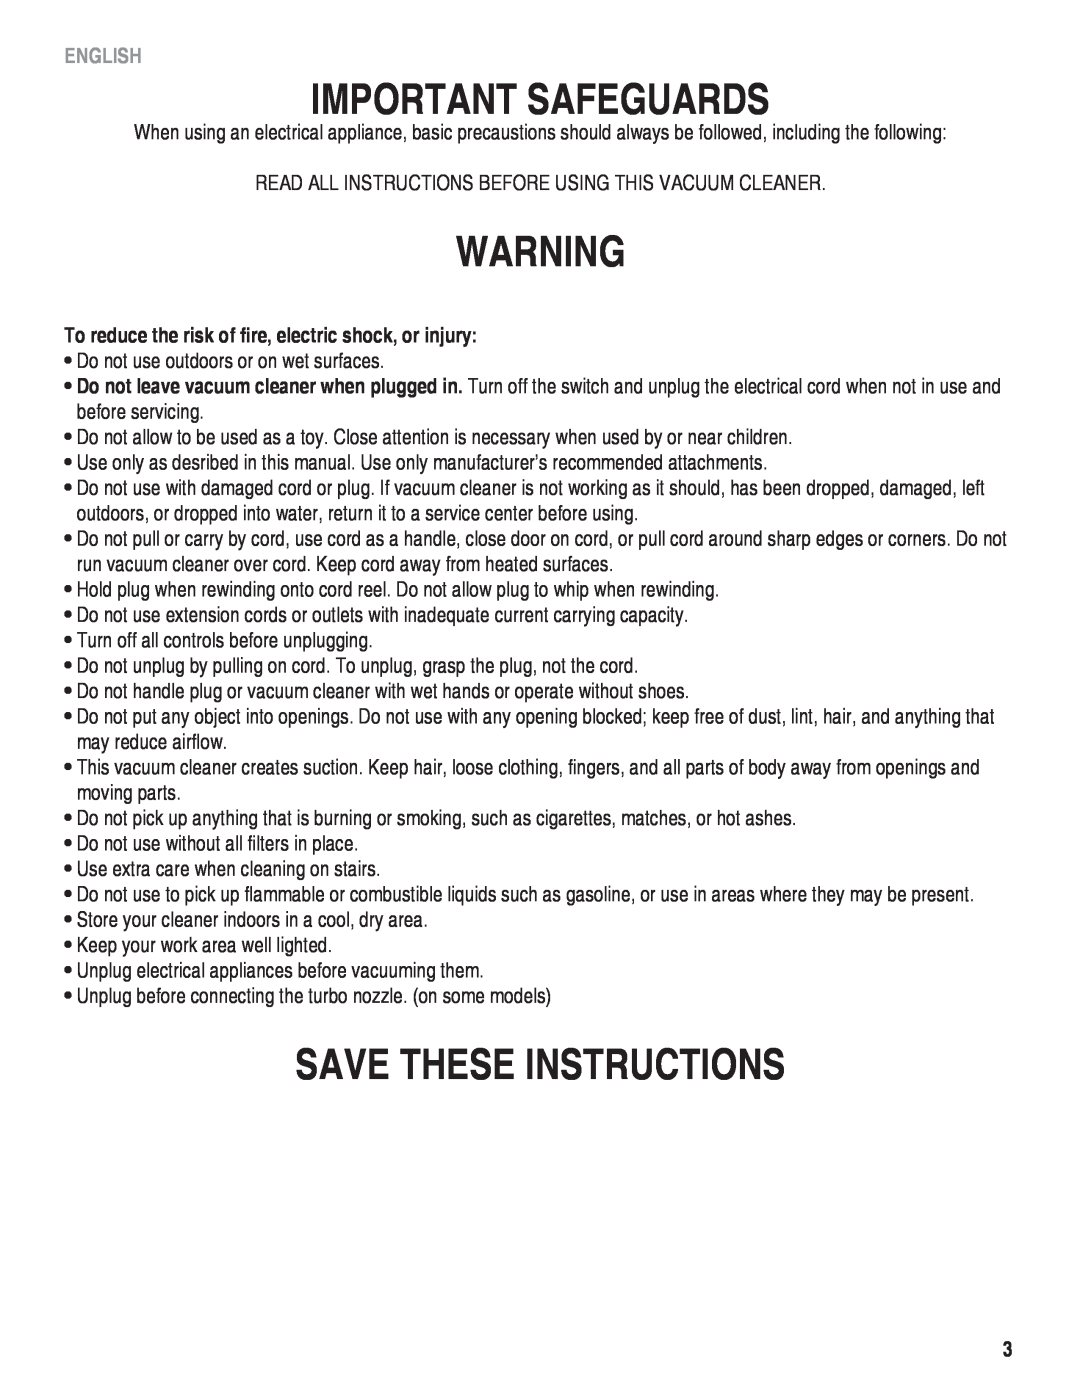 Eureka! Tents 940 Important Safeguards, Save These Instructions, To reduce the risk of fire, electric shock, or injury 